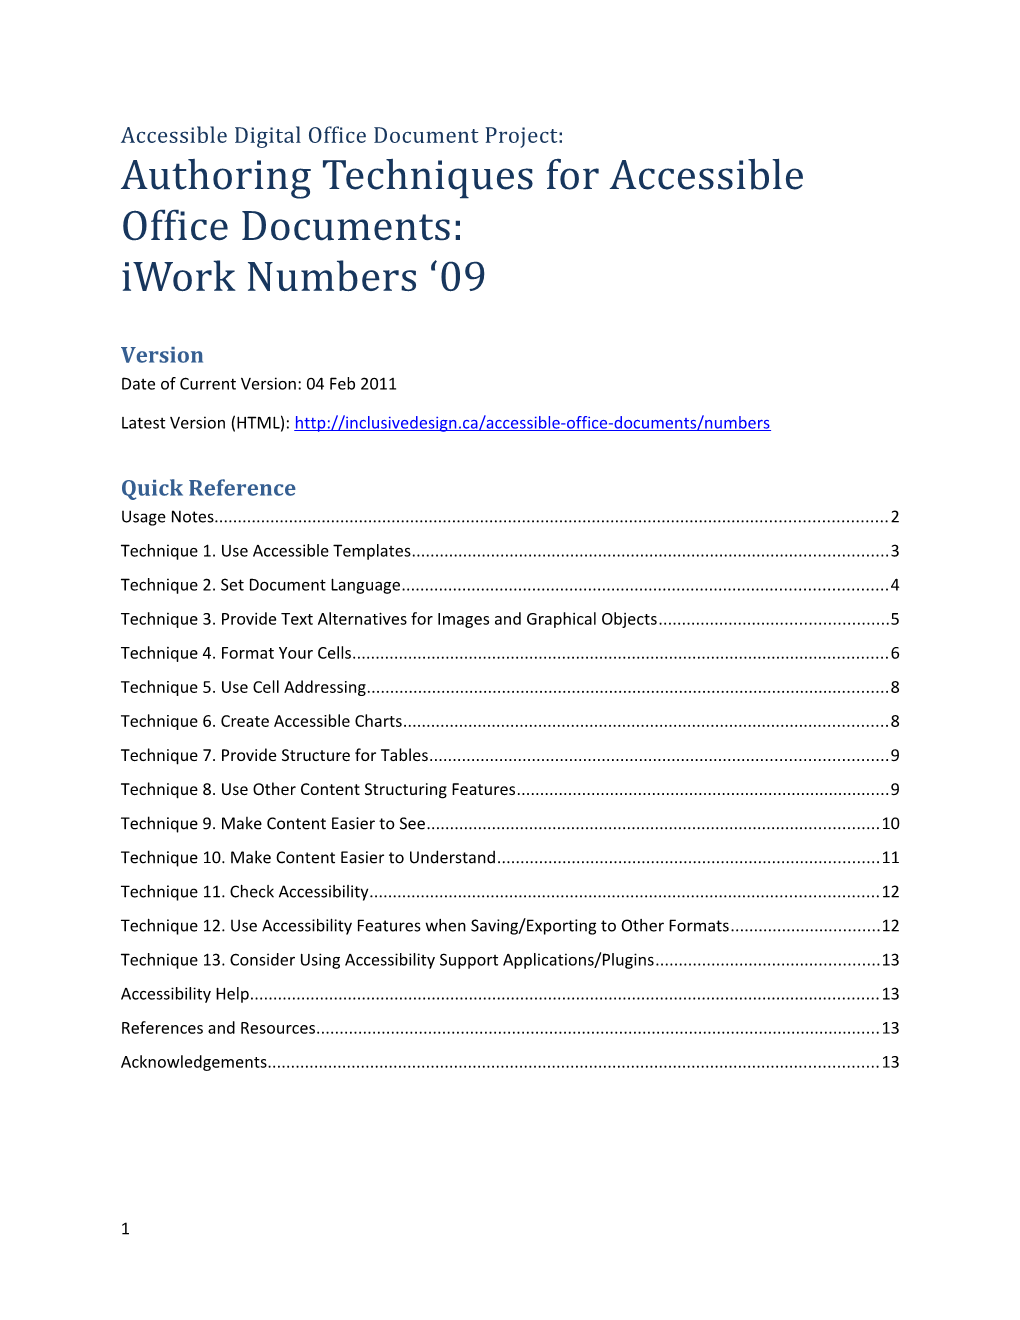 Accessible Digital Office Document Project: Authoring Techniques for Accessible Office